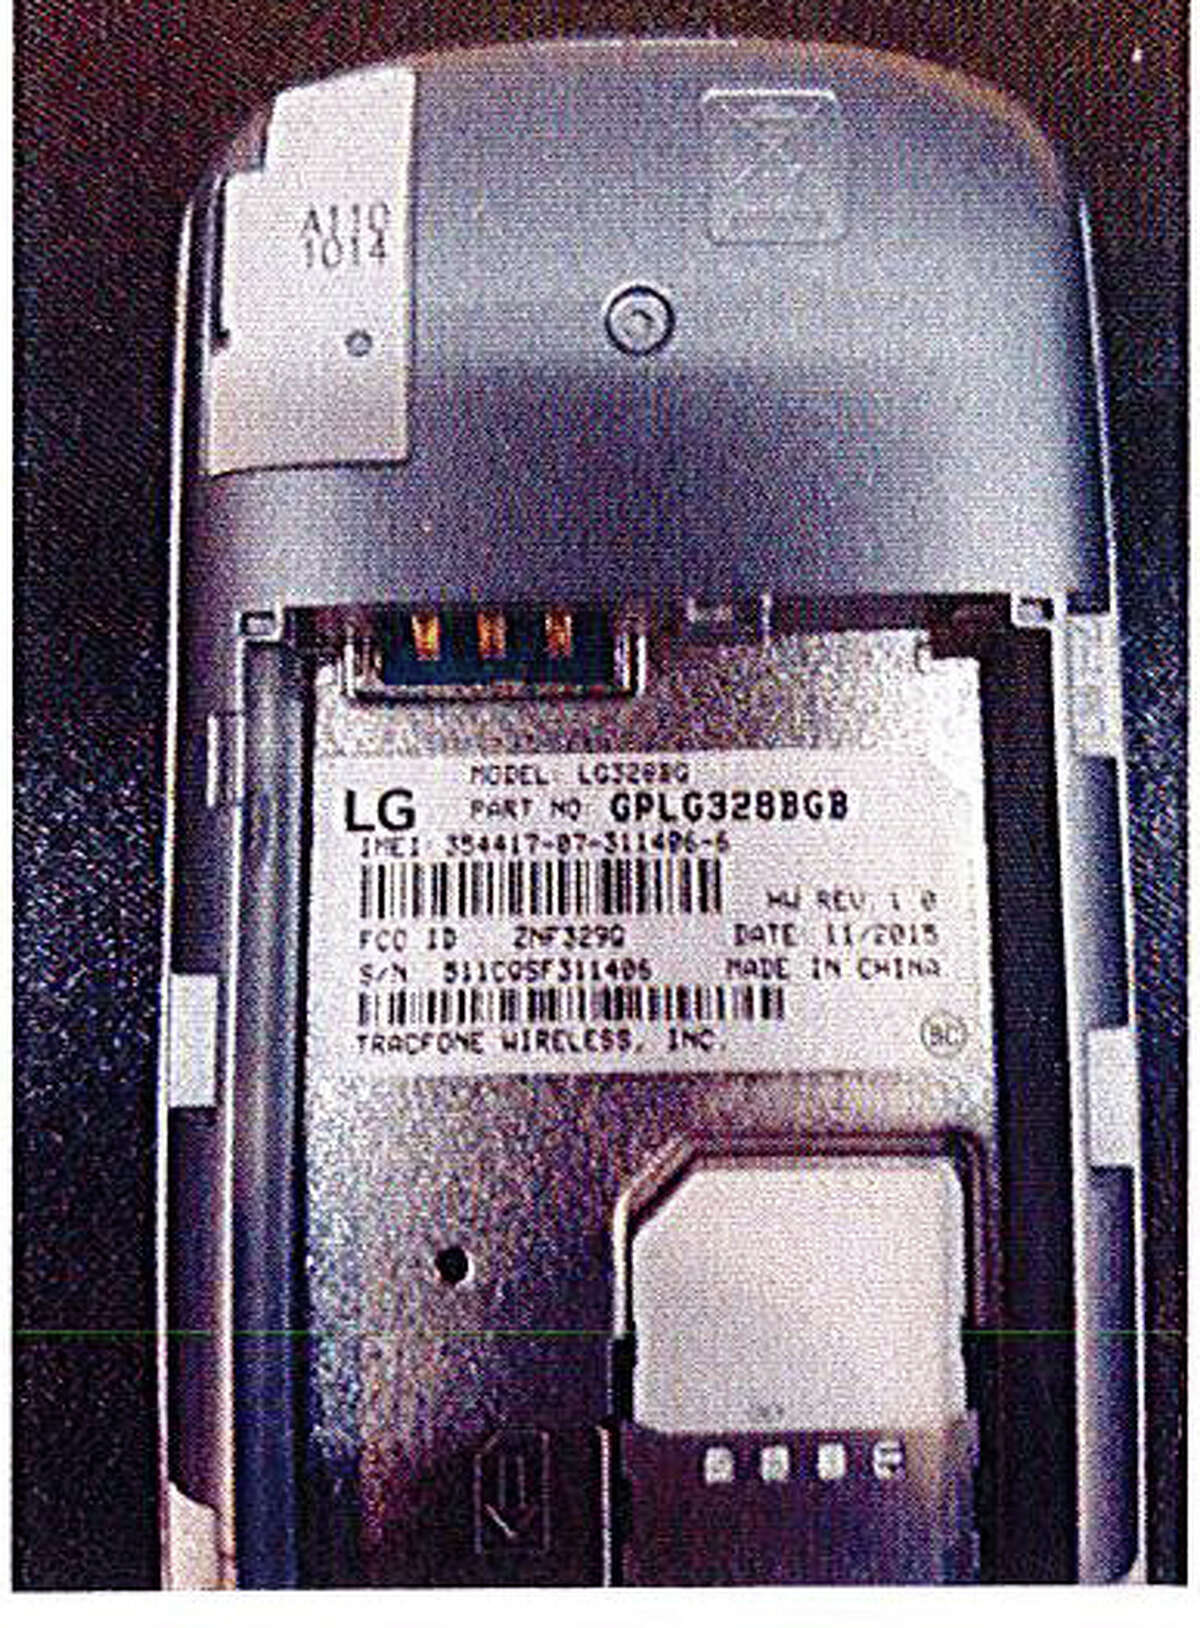 A photo of Devin Patrick Kelley's second cell phone found with him when law enforcement searched his vehicle.